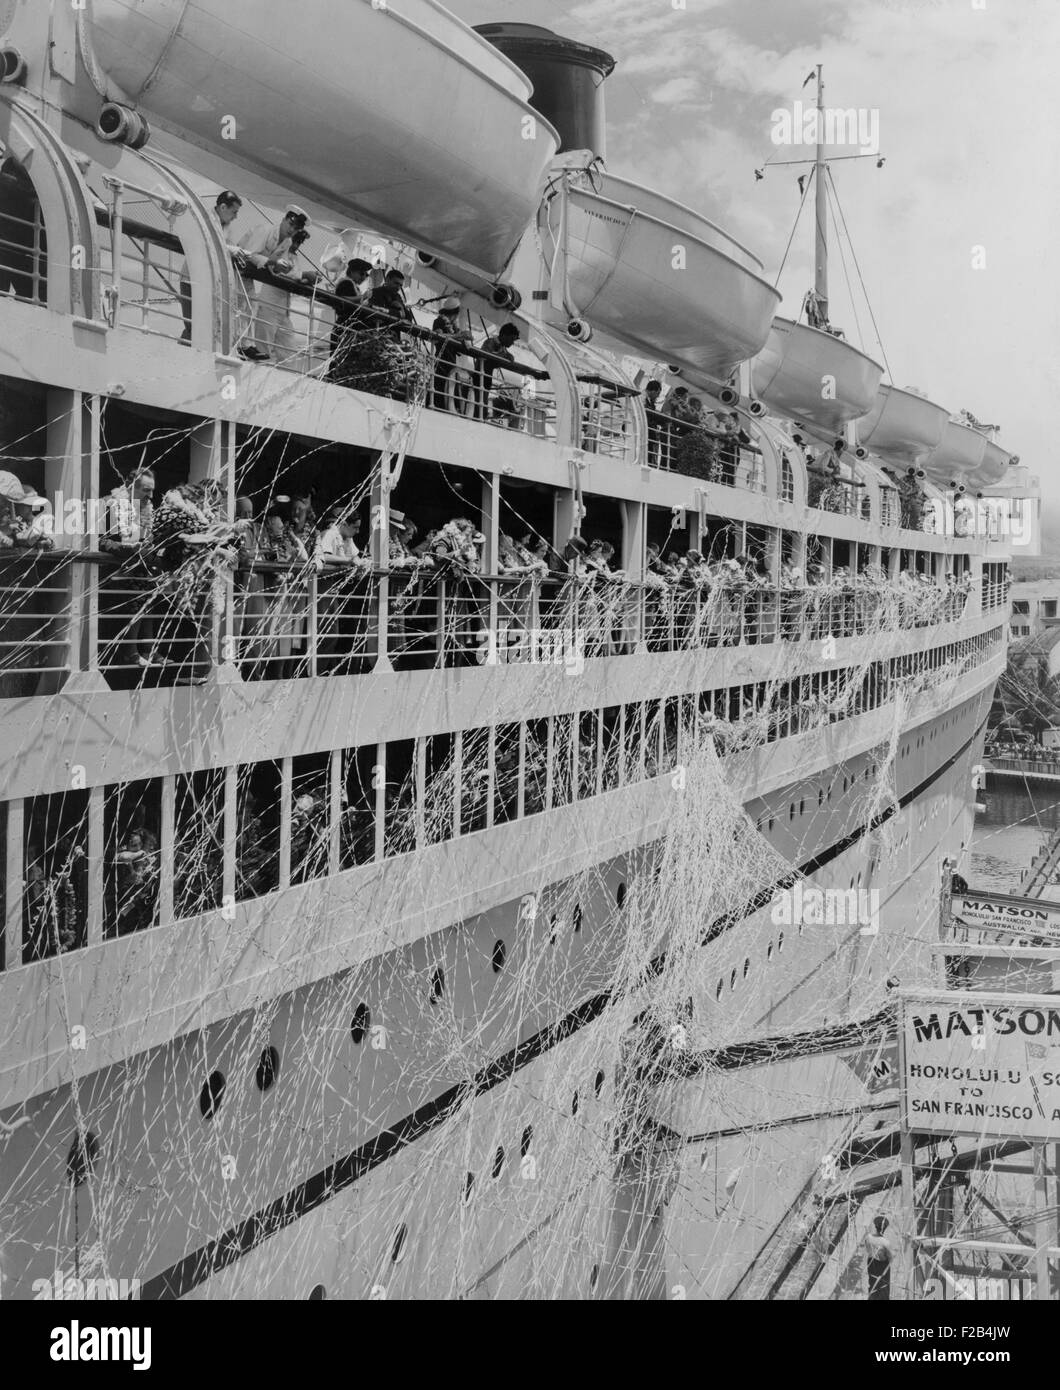 S.S. Lurline leaving Honolulu in the 1930s. Serpentine streams down her sides, and passengers wear fragrant flower leis as she pulls away from the pier. - (BSLOC 2015 1 234) Stock Photo